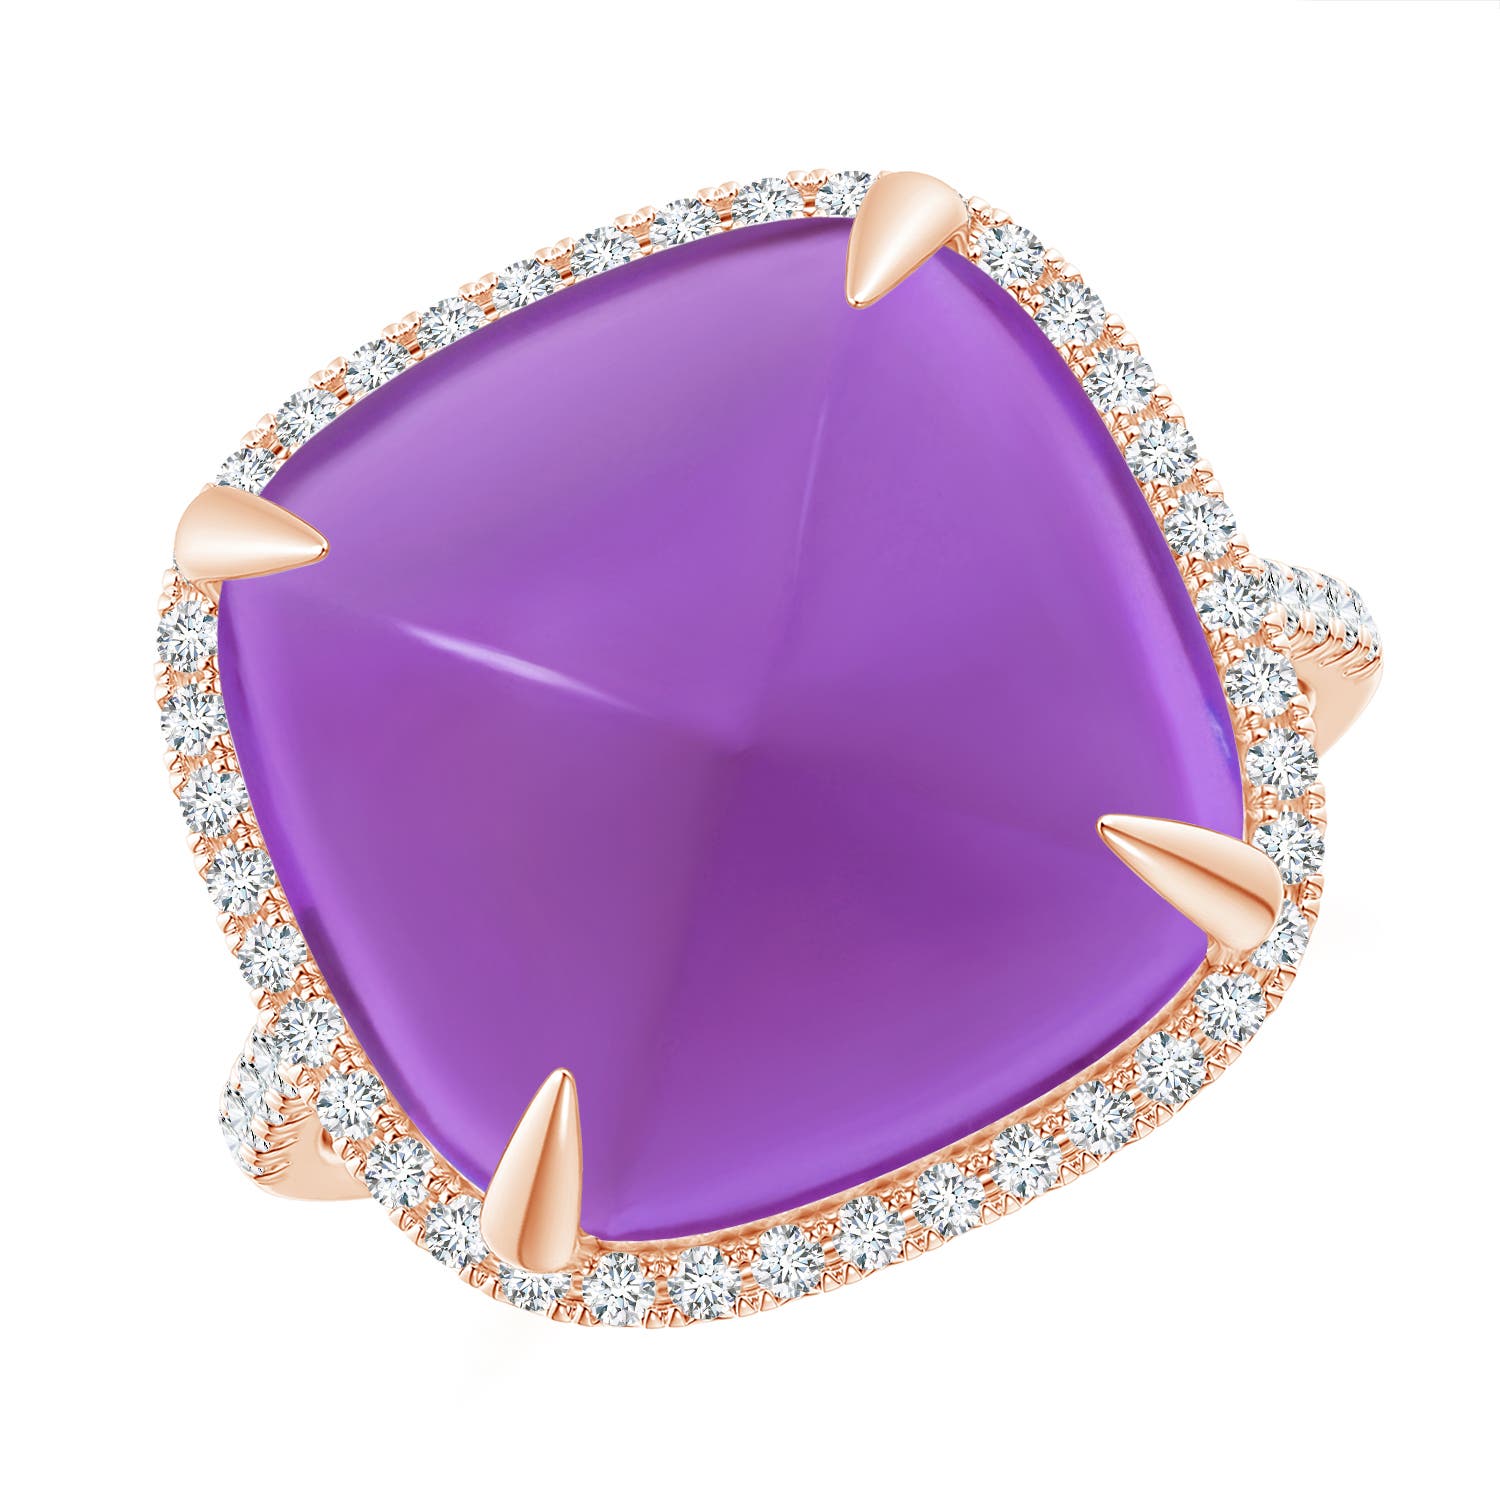 AAA - Amethyst / 12.91 CT / 14 KT Rose Gold